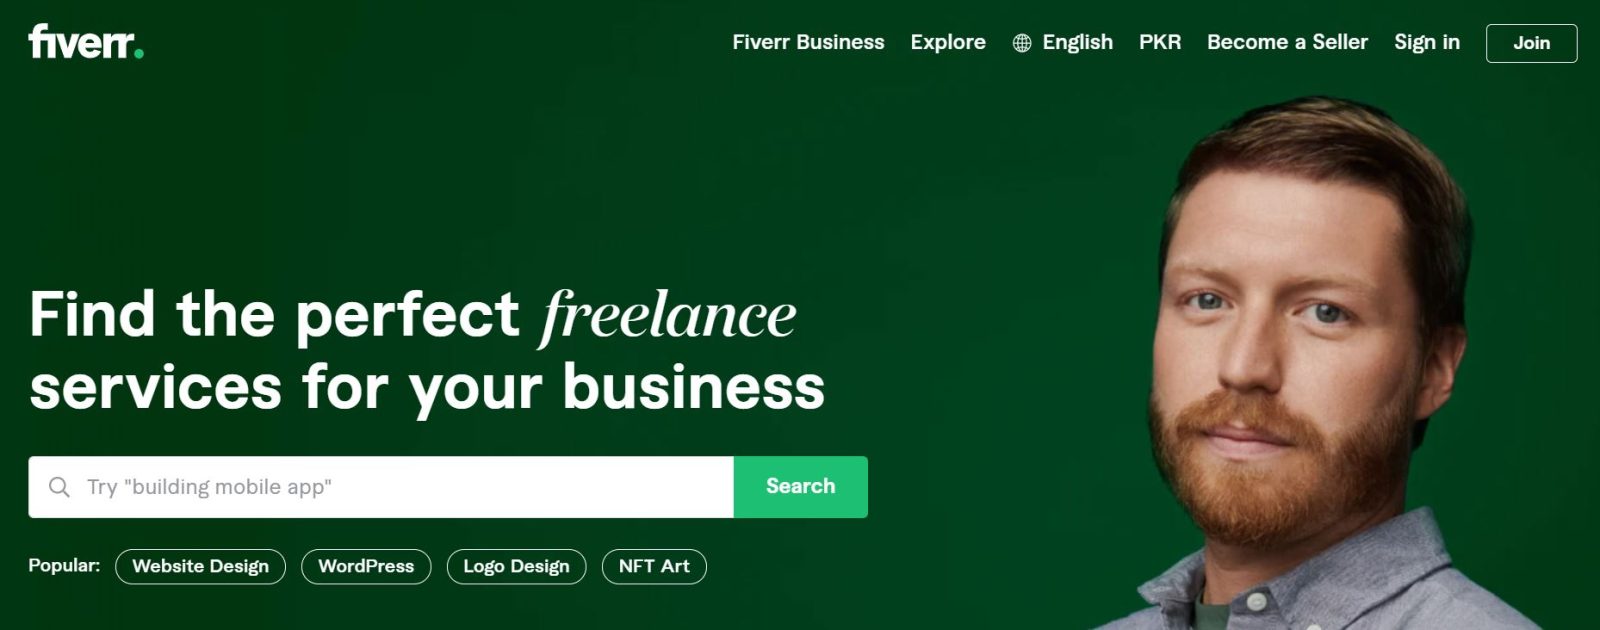 Is Fiverr Worth It? Everything You Need To Know